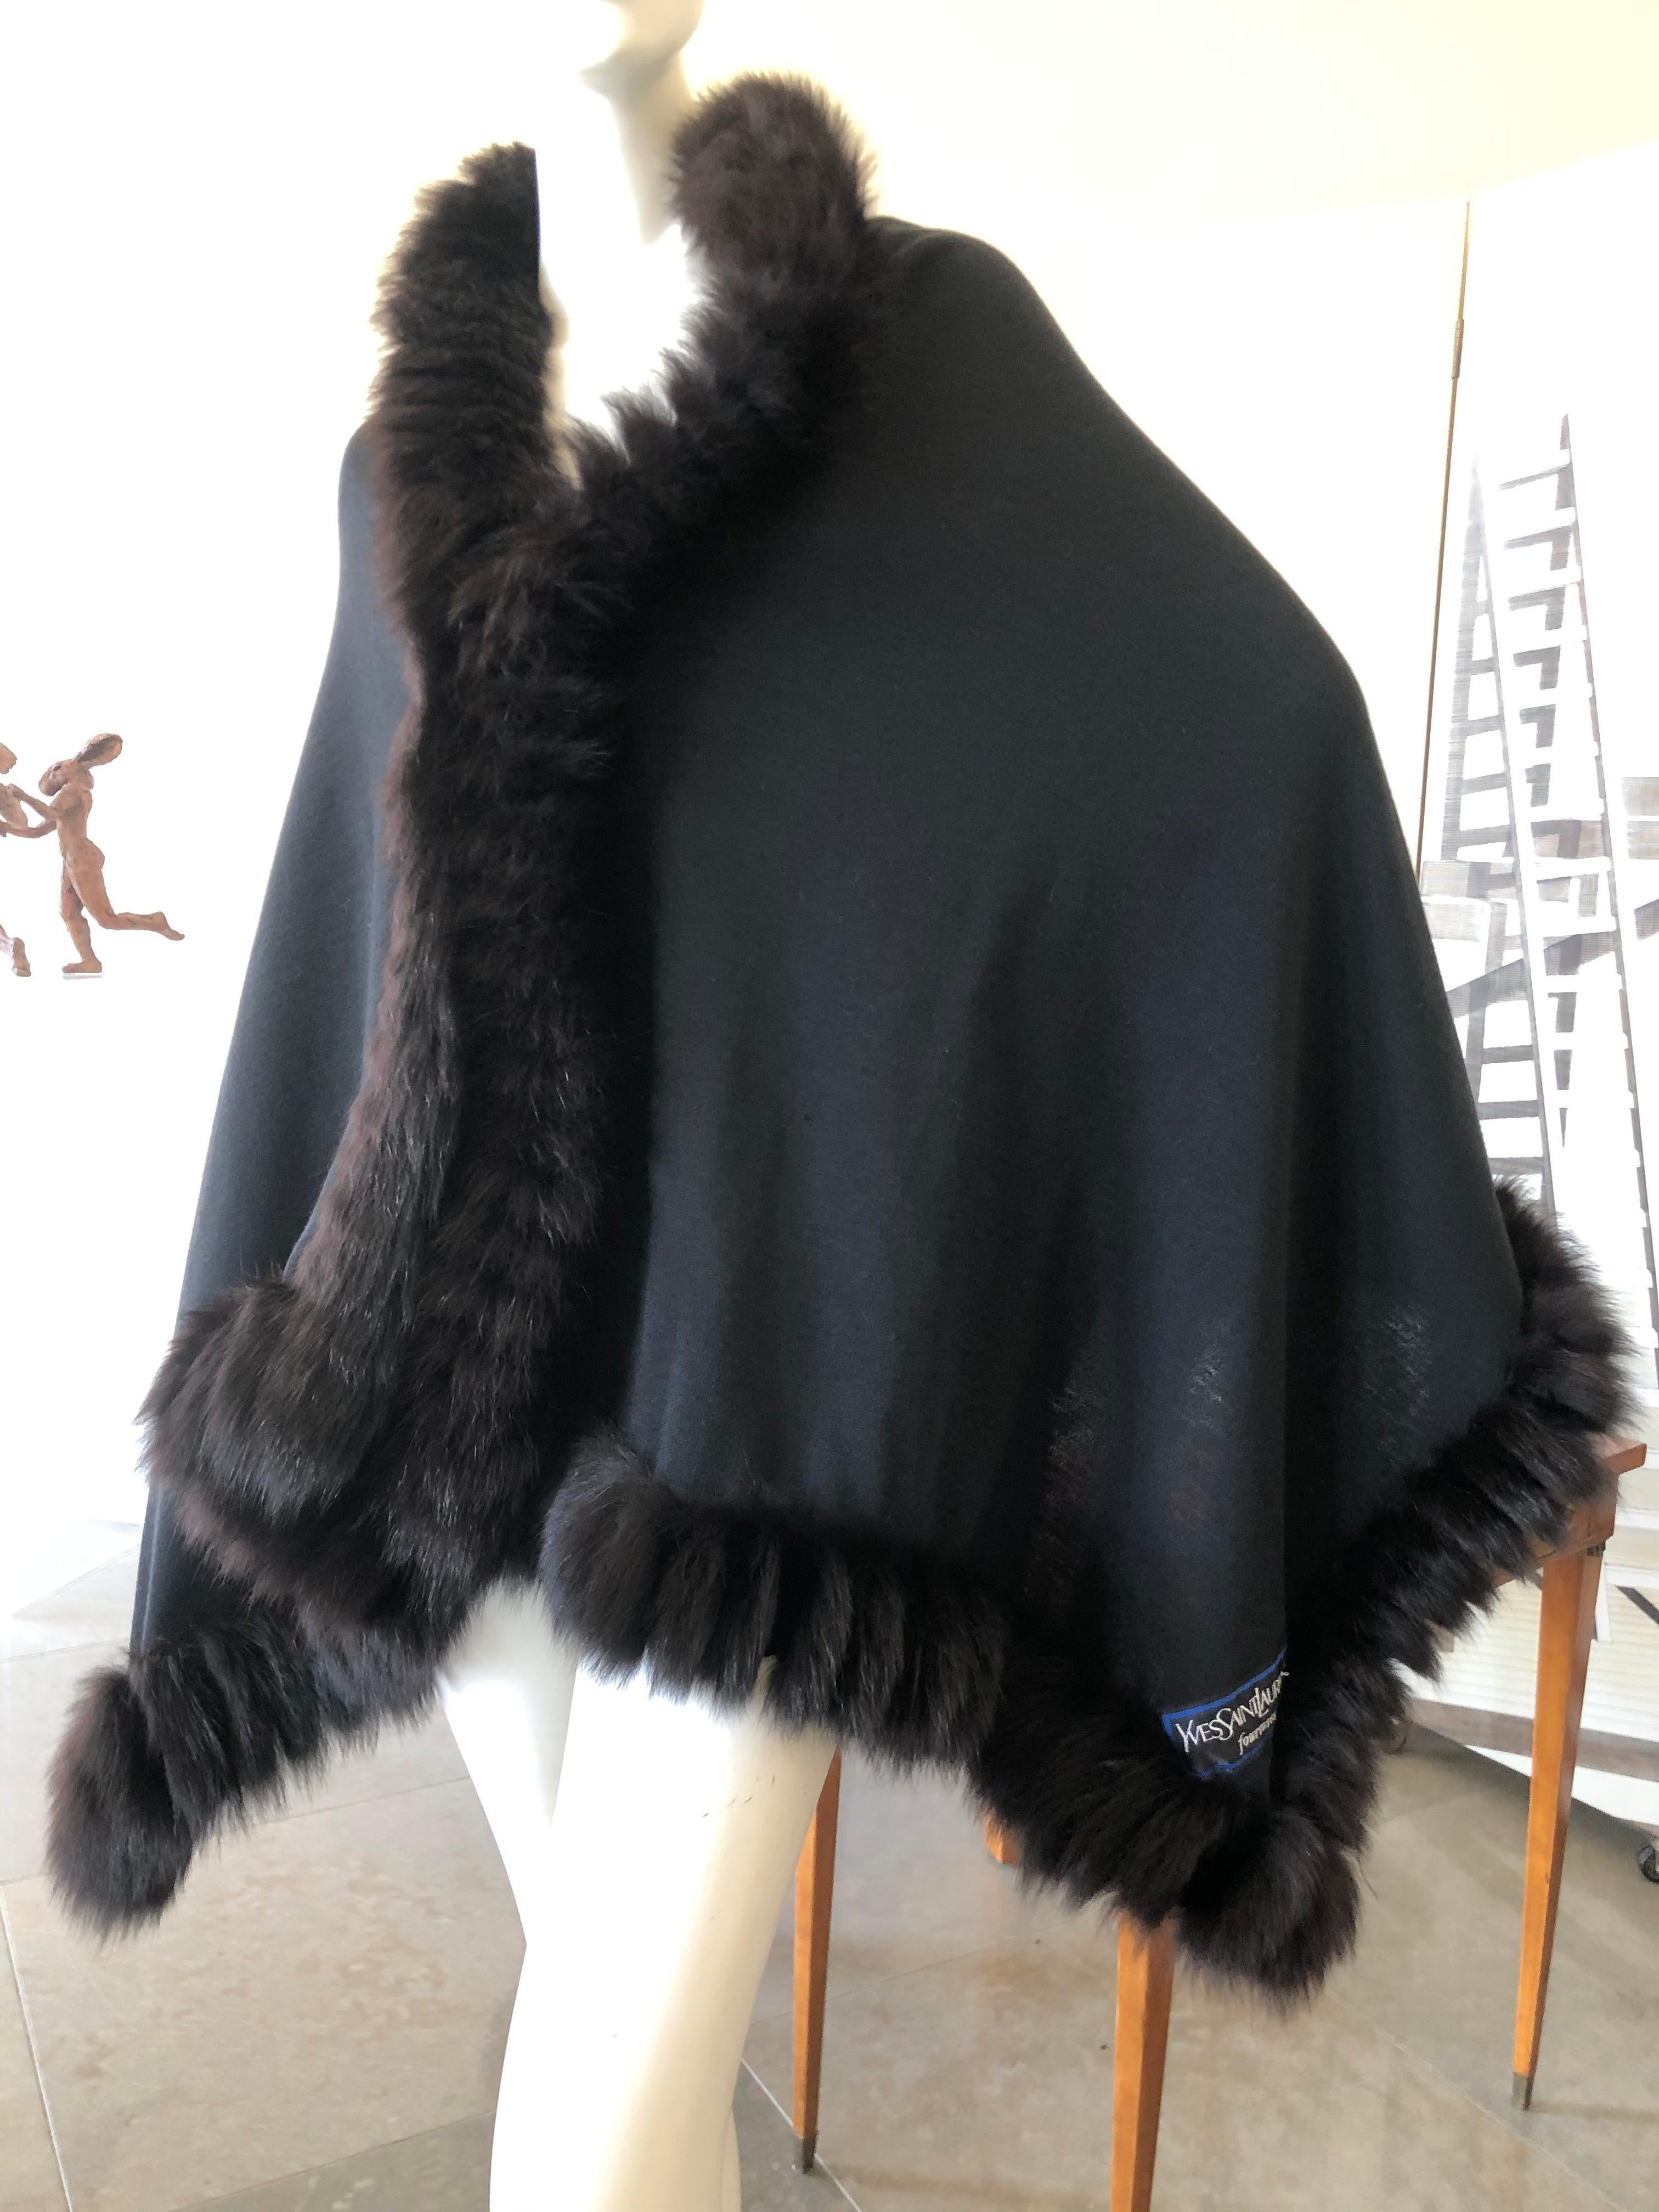 Yves Saint Laurent Fourrures Luxe Vintage Black Jersey Shawl w Fox Fur Trim .
Feels like a fine wool jersey
 Excellent pre owned condition
70